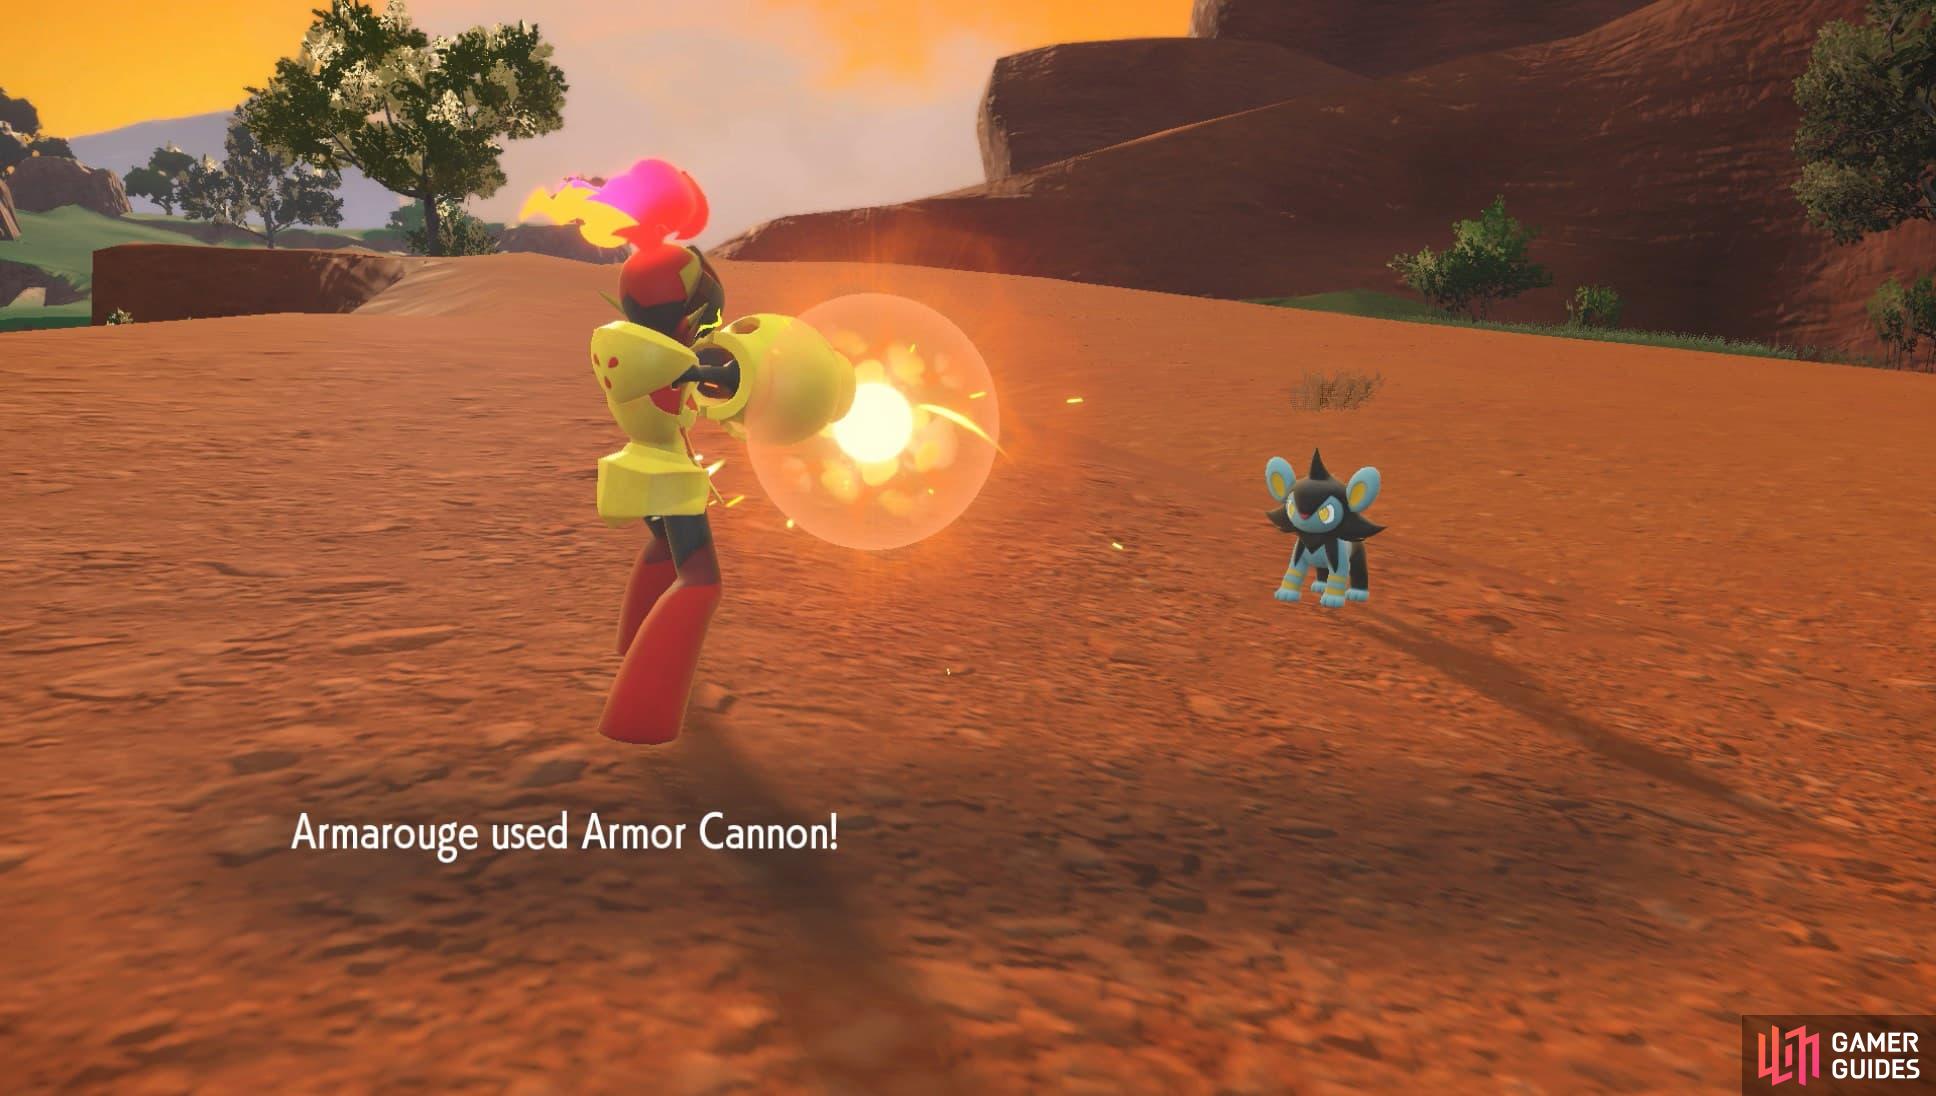 Its Armor Cannon packs a mighty punch, but weakens its defensive stats. (Credit: The Pokémon Company)